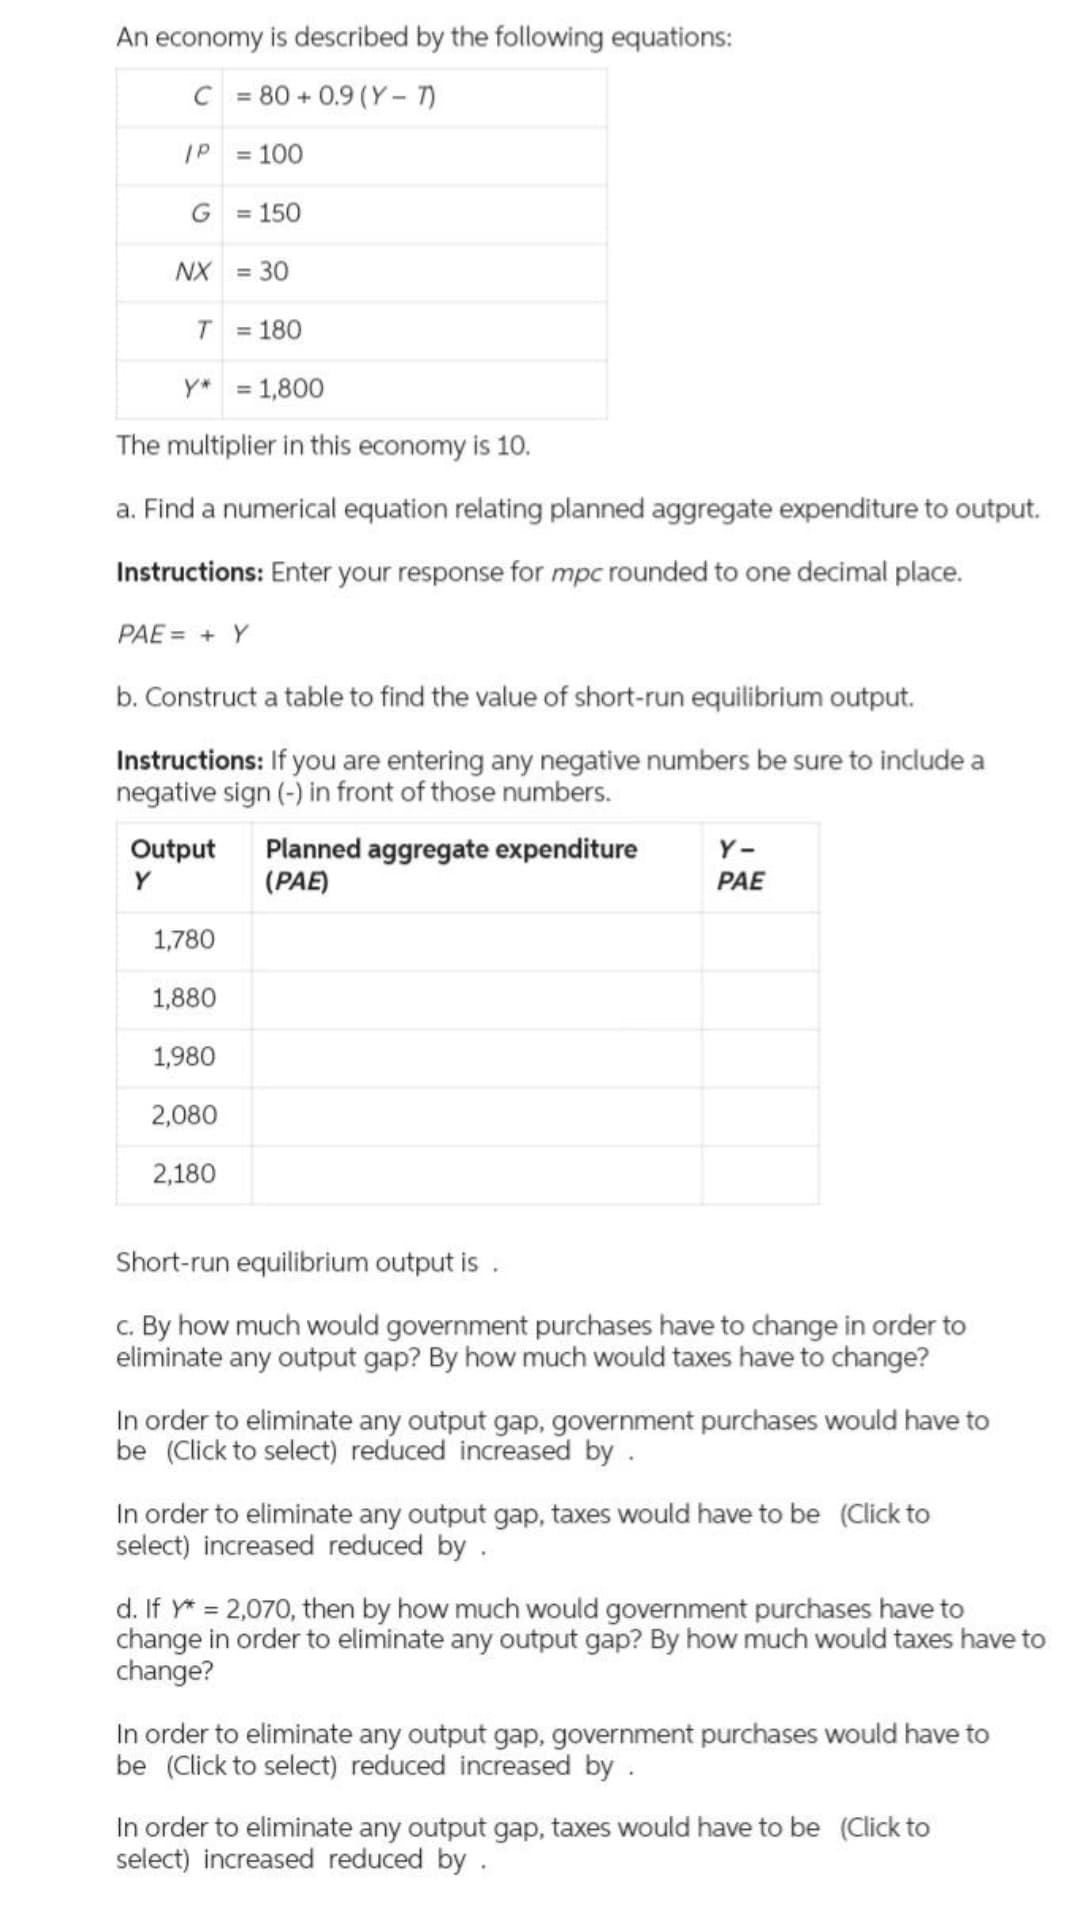 An economy is described by the following equations:
C = 80+ 0.9 (Y-7)
IP
= 100
G
NX
T
= 180
Y* = 1,800
The multiplier in this economy is 10.
a. Find a numerical equation relating planned aggregate expenditure to output.
Instructions: Enter your response for mpc rounded to one decimal place.
PAE = + Y
= 150
Output
Y
= 30
b. Construct a table to find the value of short-run equilibrium output.
Instructions: If you are entering any negative numbers be sure to include a
negative sign (-) in front of those numbers.
1,780
1,880
1,980
2,080
2,180
Planned aggregate expenditure
(PAE)
Y-
PAE
Short-run equilibrium output is.
c. By how much would government purchases have to change in order to
eliminate any output gap? By how much would taxes have to change?
In order to eliminate any output gap, government purchases would have to
be (Click to select) reduced increased by .
In order to eliminate any output gap, taxes would have to be (Click to
select) increased reduced by .
d. If y* = 2,070, then by how much would government purchases have to
change in order to eliminate any output gap? By how much would taxes have to
change?
In order to eliminate any output gap, government purchases would have to
be (Click to select) reduced increased by .
In order to eliminate any output gap, taxes would have to be (Click to
select) increased reduced by .